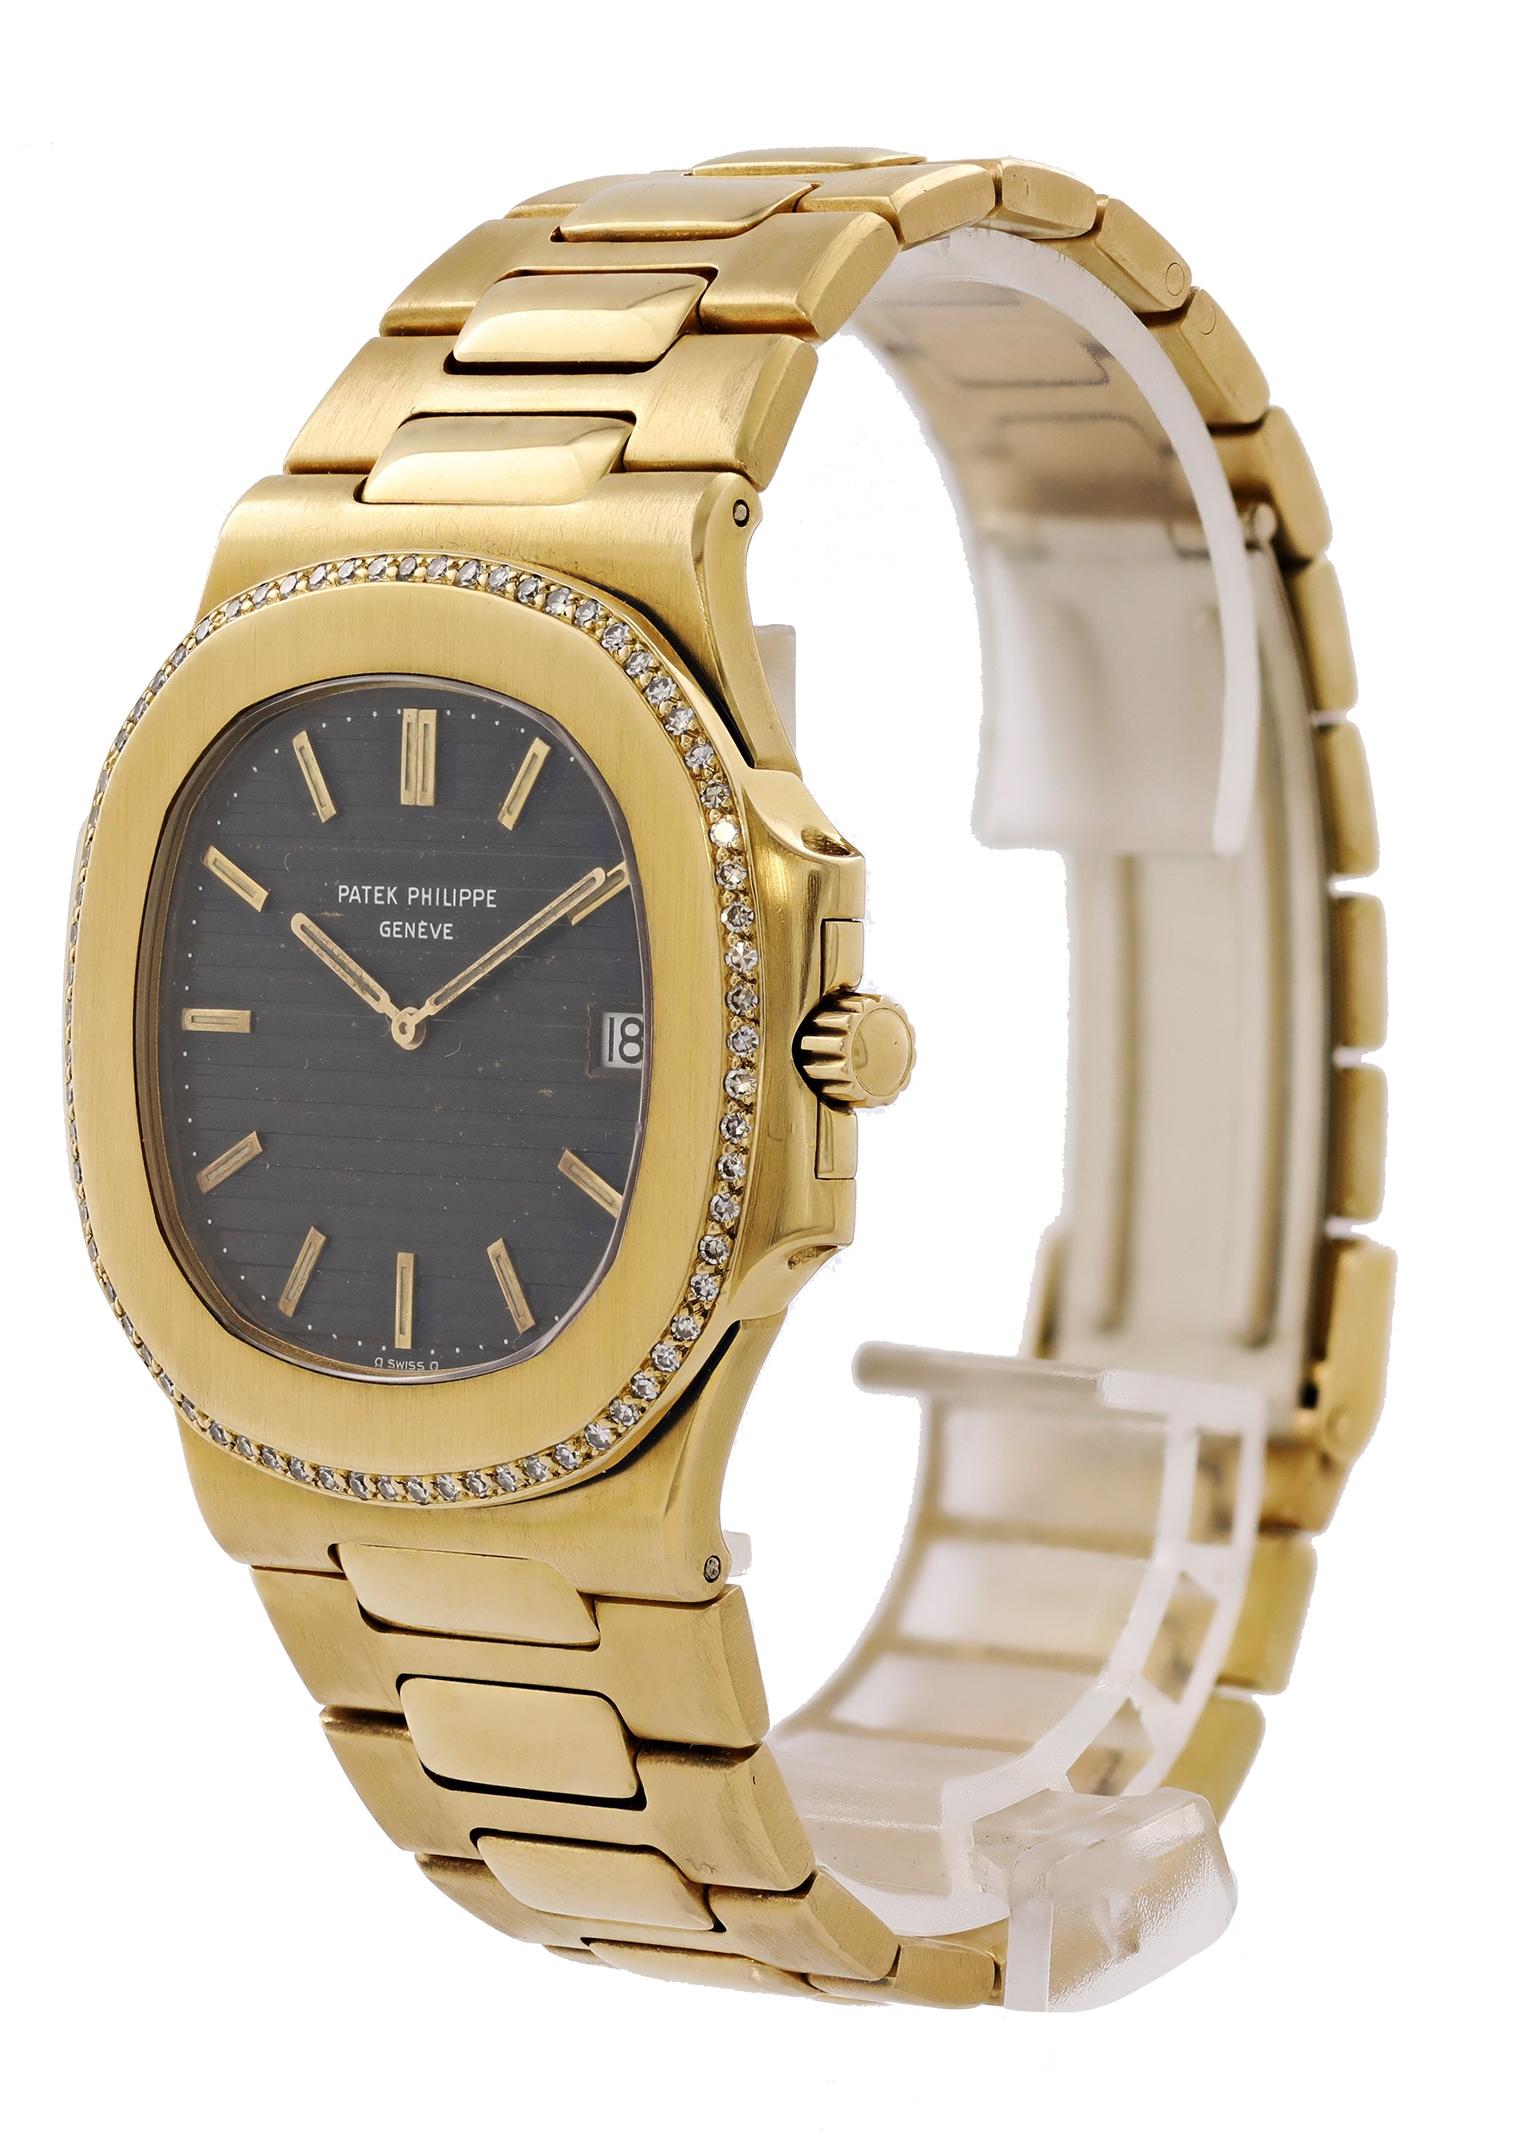 Patek Philippe Nautilus 4700/4 Mens Watch. 
27mm 18k Yellow Gold case. 
Yellow Gold Stationary bezel. 
Black dial with gold hands and index hour markers. 
Minute markers on the outer dial. 
Date display at the 3 o'clock position. 
Yellow Gold